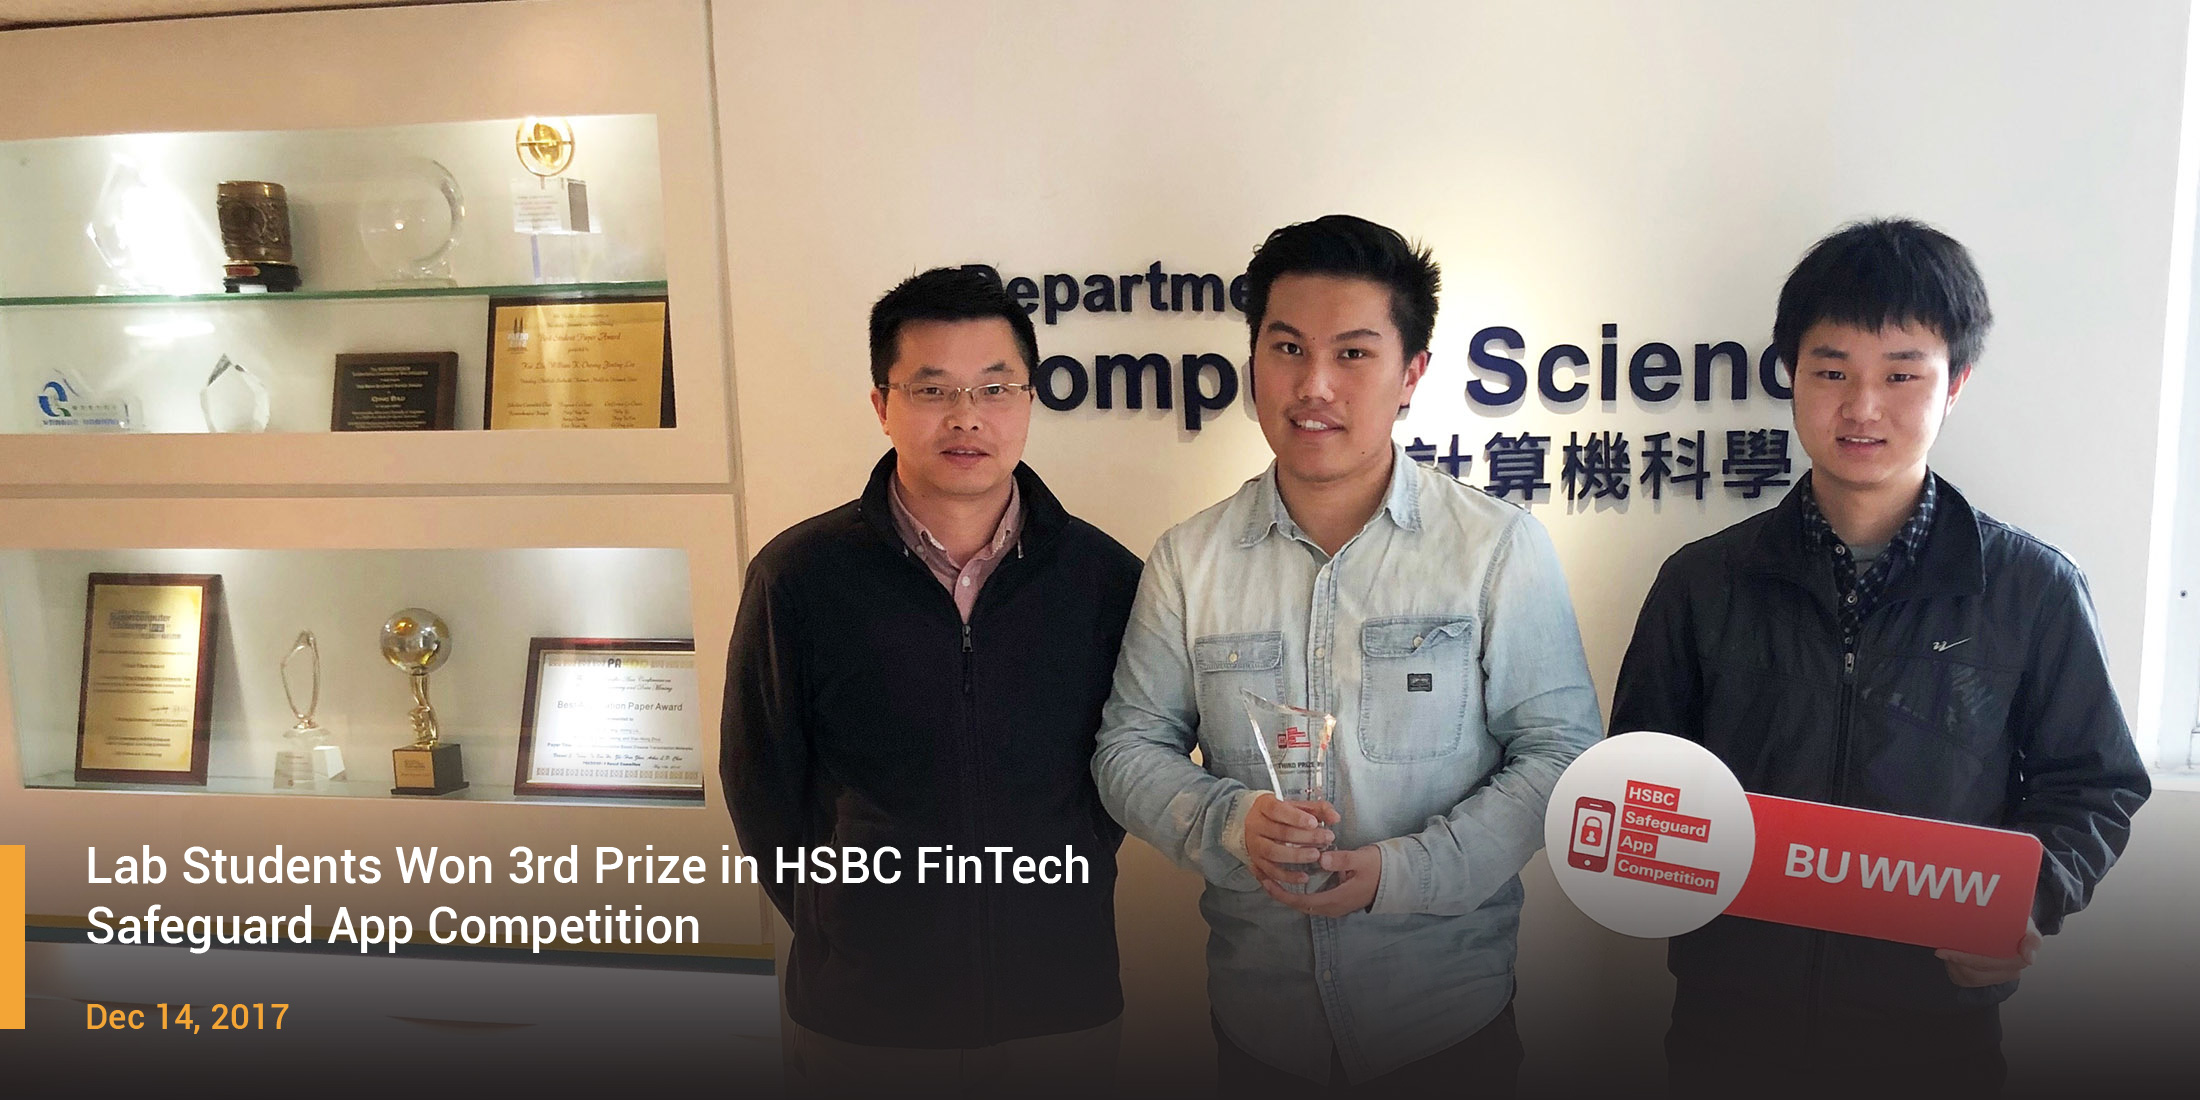 Lab Students Won 3rd Prize in HSBC FinTech Safeguard App Competition